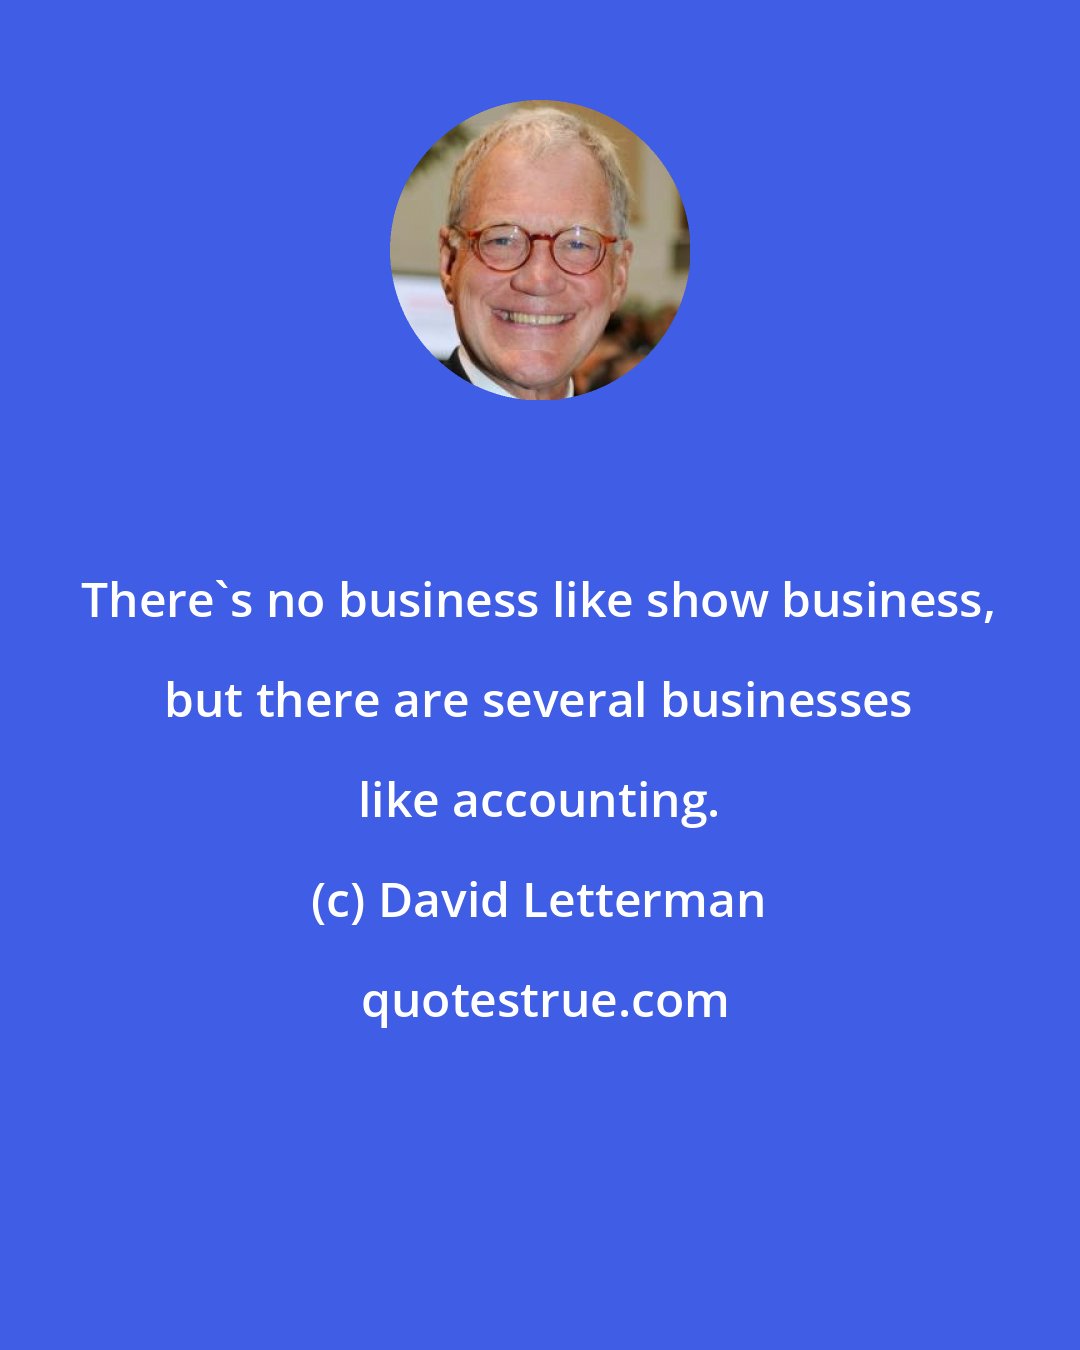 David Letterman: There's no business like show business, but there are several businesses like accounting.